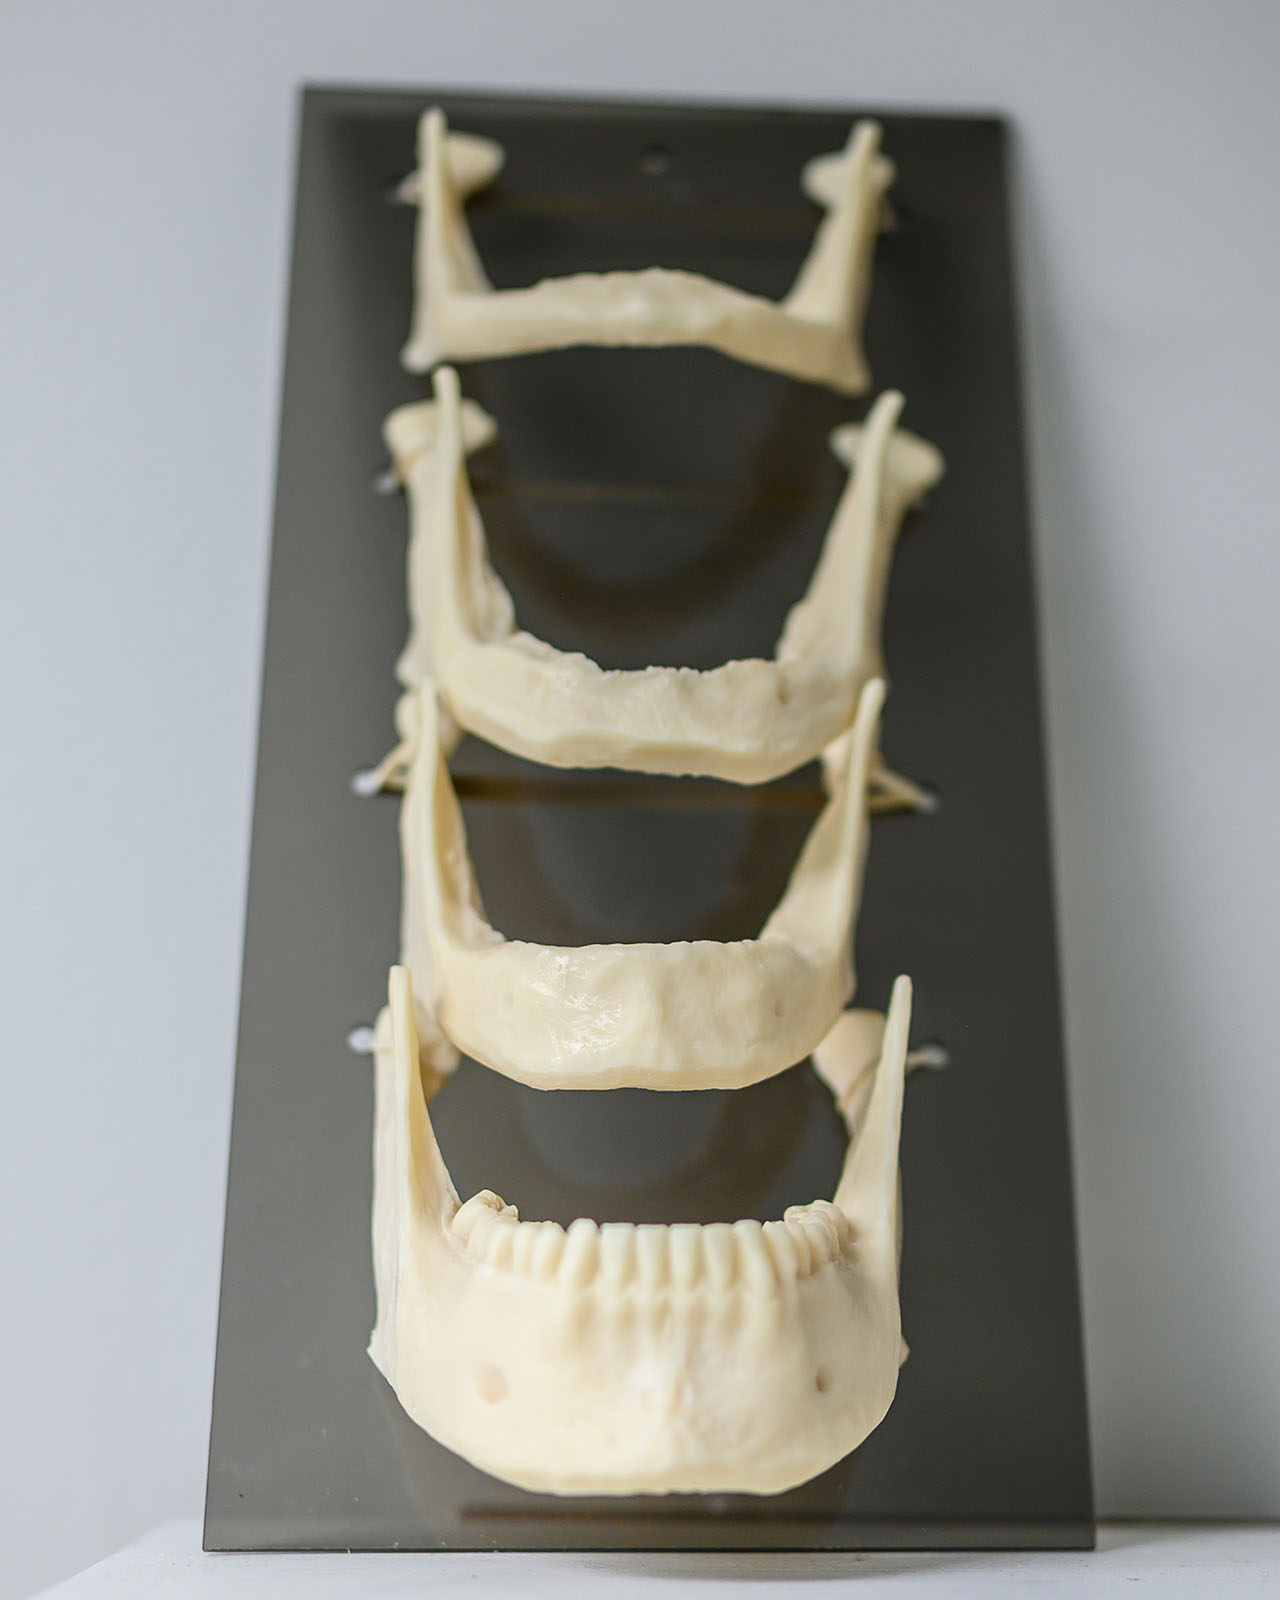 Jaw models are on display at LaGrange Oral Surgery and Implant Center.